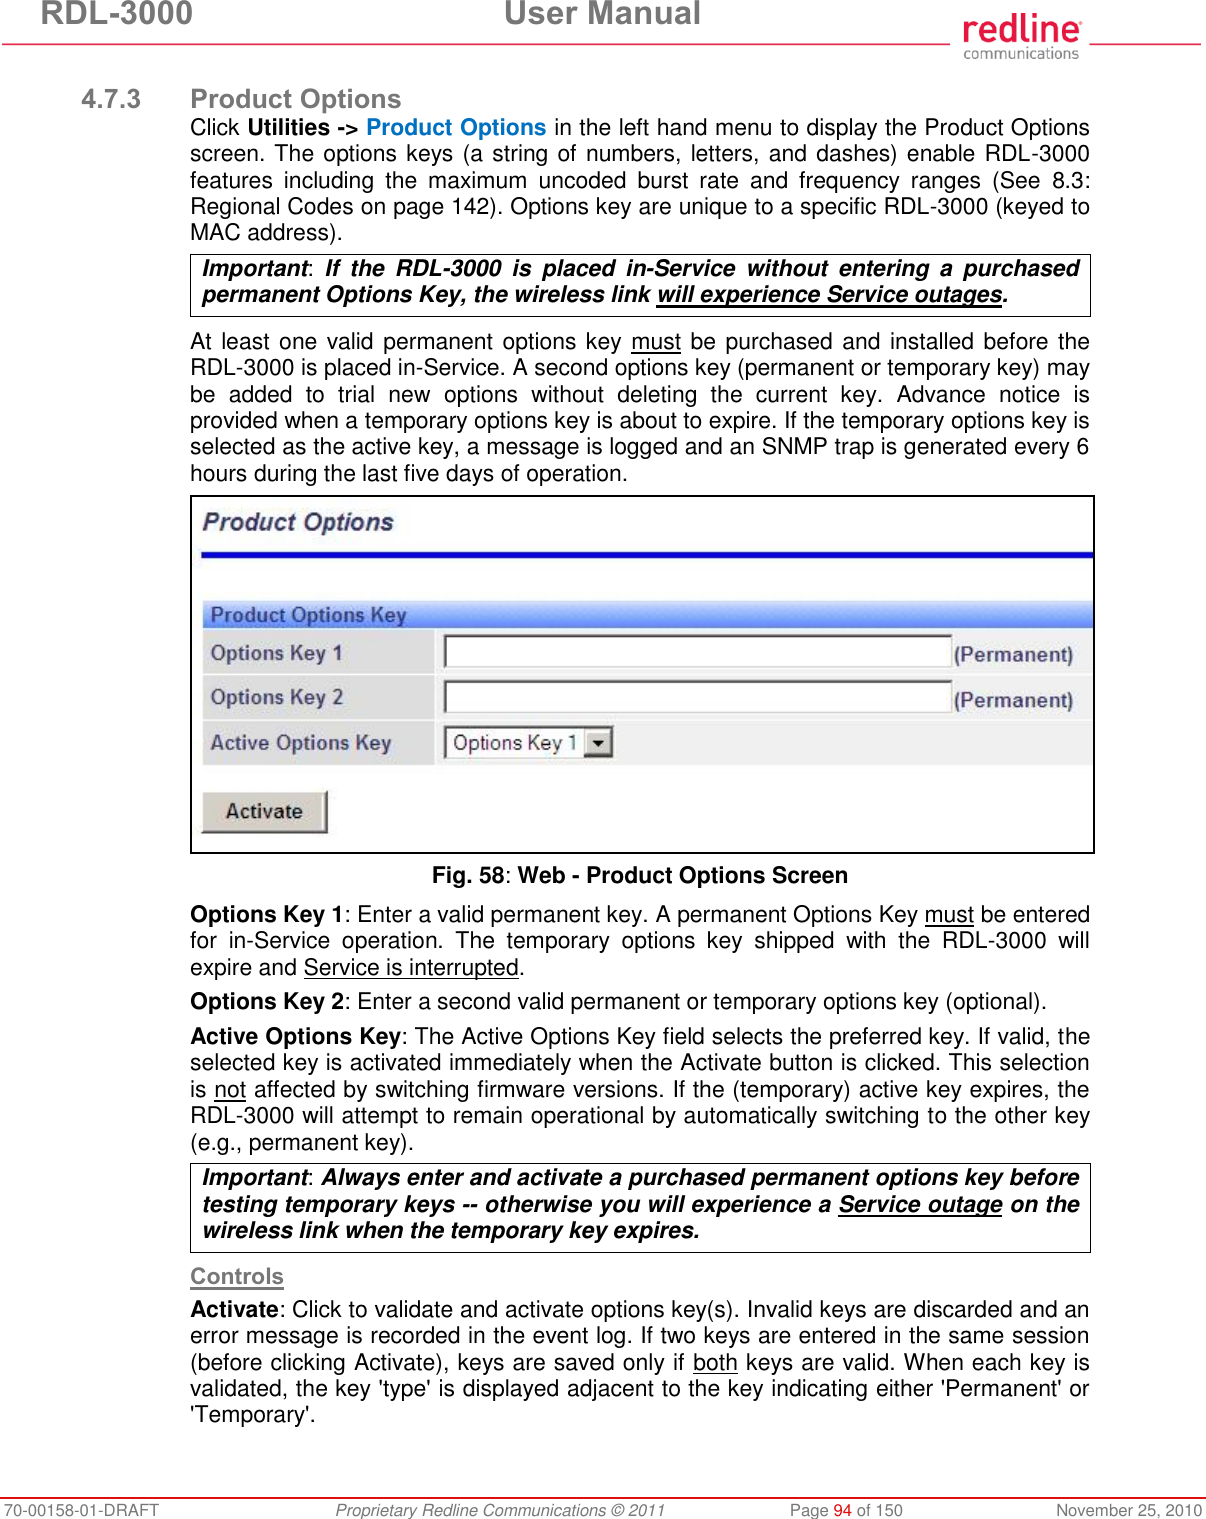 RDL-3000  User Manual 70-00158-01-DRAFT  Proprietary Redline Communications © 2011  Page 94 of 150  November 25, 2010  4.7.3 Product Options Click Utilities -&gt; Product Options in the left hand menu to display the Product Options screen. The options keys (a string of numbers, letters, and dashes) enable RDL-3000 features  including  the  maximum  uncoded  burst  rate  and  frequency  ranges  (See  8.3: Regional Codes on page 142). Options key are unique to a specific RDL-3000 (keyed to MAC address). Important:  If  the  RDL-3000  is  placed  in-Service  without  entering  a  purchased permanent Options Key, the wireless link will experience Service outages.  At least one valid permanent options key must be purchased and installed before the RDL-3000 is placed in-Service. A second options key (permanent or temporary key) may be  added  to  trial  new  options  without  deleting  the  current  key.  Advance  notice  is provided when a temporary options key is about to expire. If the temporary options key is selected as the active key, a message is logged and an SNMP trap is generated every 6 hours during the last five days of operation.  Fig. 58: Web - Product Options Screen Options Key 1: Enter a valid permanent key. A permanent Options Key must be entered for  in-Service  operation.  The  temporary  options  key  shipped  with  the  RDL-3000  will expire and Service is interrupted.  Options Key 2: Enter a second valid permanent or temporary options key (optional). Active Options Key: The Active Options Key field selects the preferred key. If valid, the selected key is activated immediately when the Activate button is clicked. This selection is not affected by switching firmware versions. If the (temporary) active key expires, the RDL-3000 will attempt to remain operational by automatically switching to the other key (e.g., permanent key). Important: Always enter and activate a purchased permanent options key before testing temporary keys -- otherwise you will experience a Service outage on the wireless link when the temporary key expires.  Controls Activate: Click to validate and activate options key(s). Invalid keys are discarded and an error message is recorded in the event log. If two keys are entered in the same session (before clicking Activate), keys are saved only if both keys are valid. When each key is validated, the key &apos;type&apos; is displayed adjacent to the key indicating either &apos;Permanent&apos; or &apos;Temporary&apos;. 